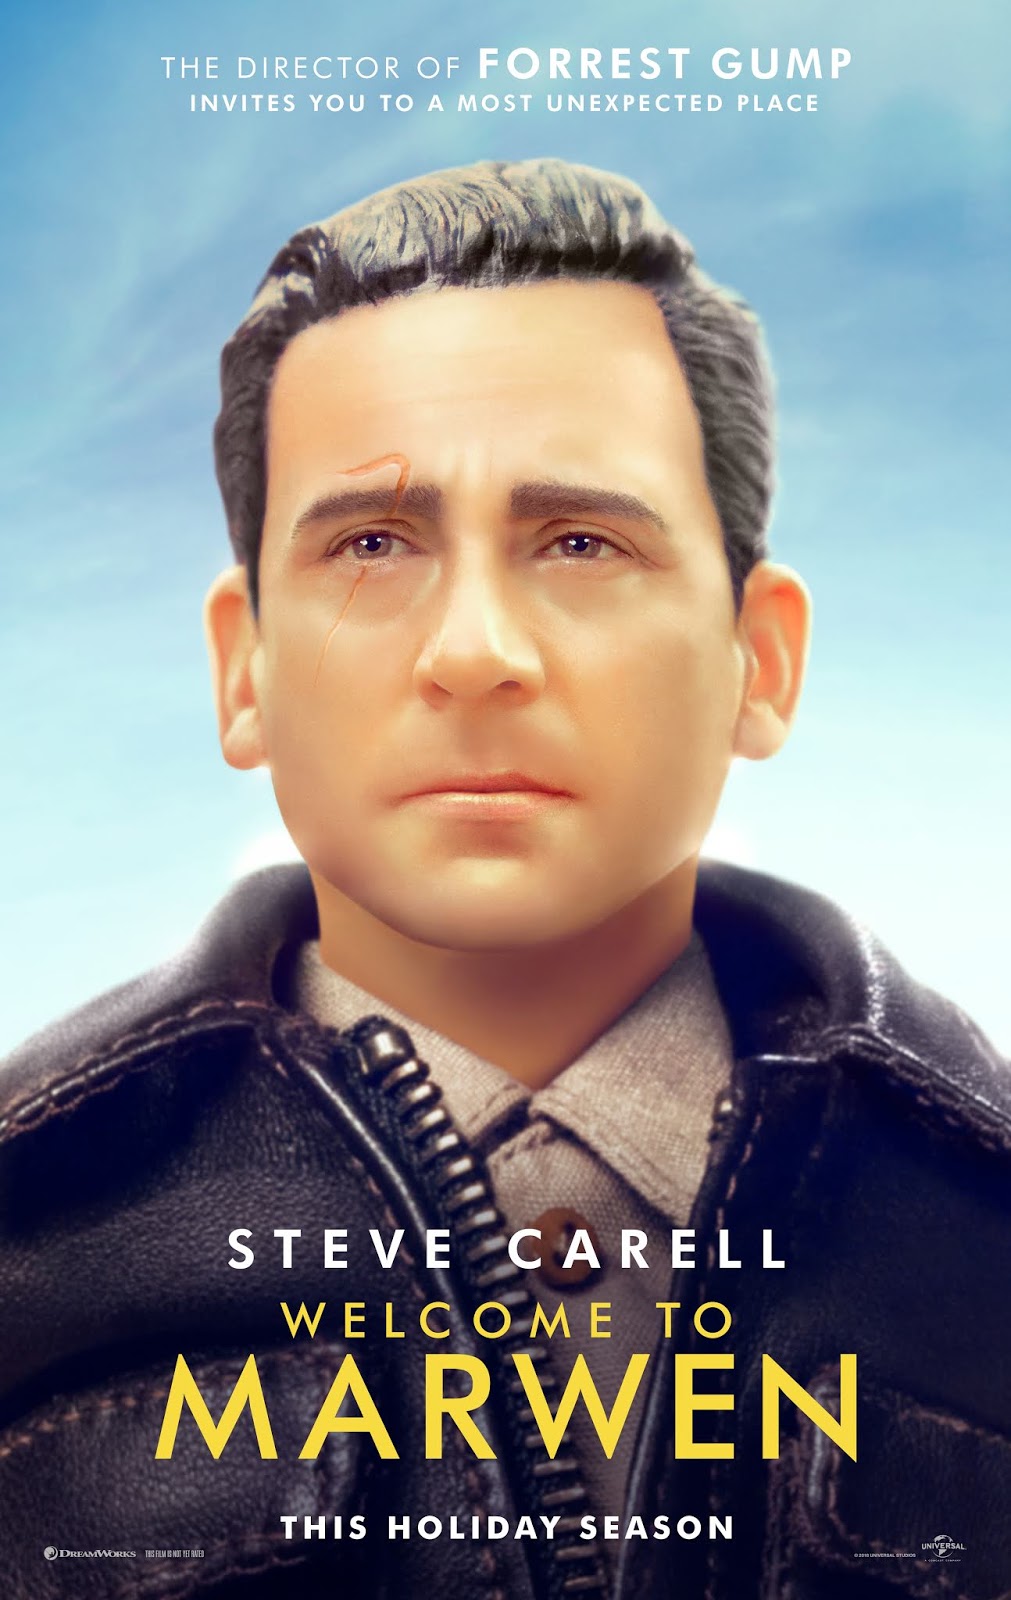 To Marwen Trailer Available Now! In Theaters 11/21